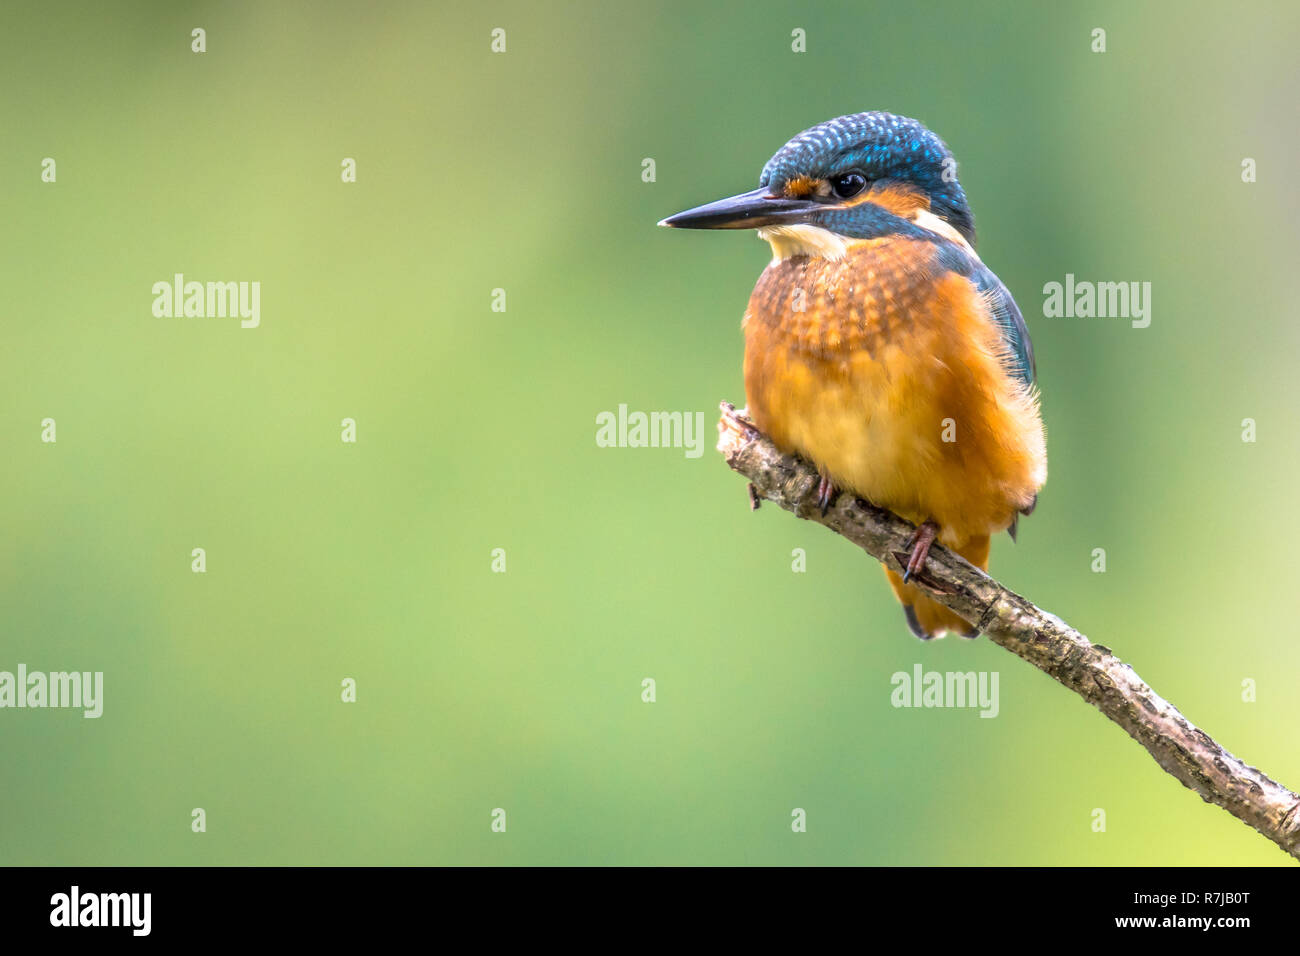 Eurasian kingfisher (Alcedo atthis) with copyspace. This bird is a widespread small kingfisher with distribution across Europe, Asia and North Africa. Stock Photo